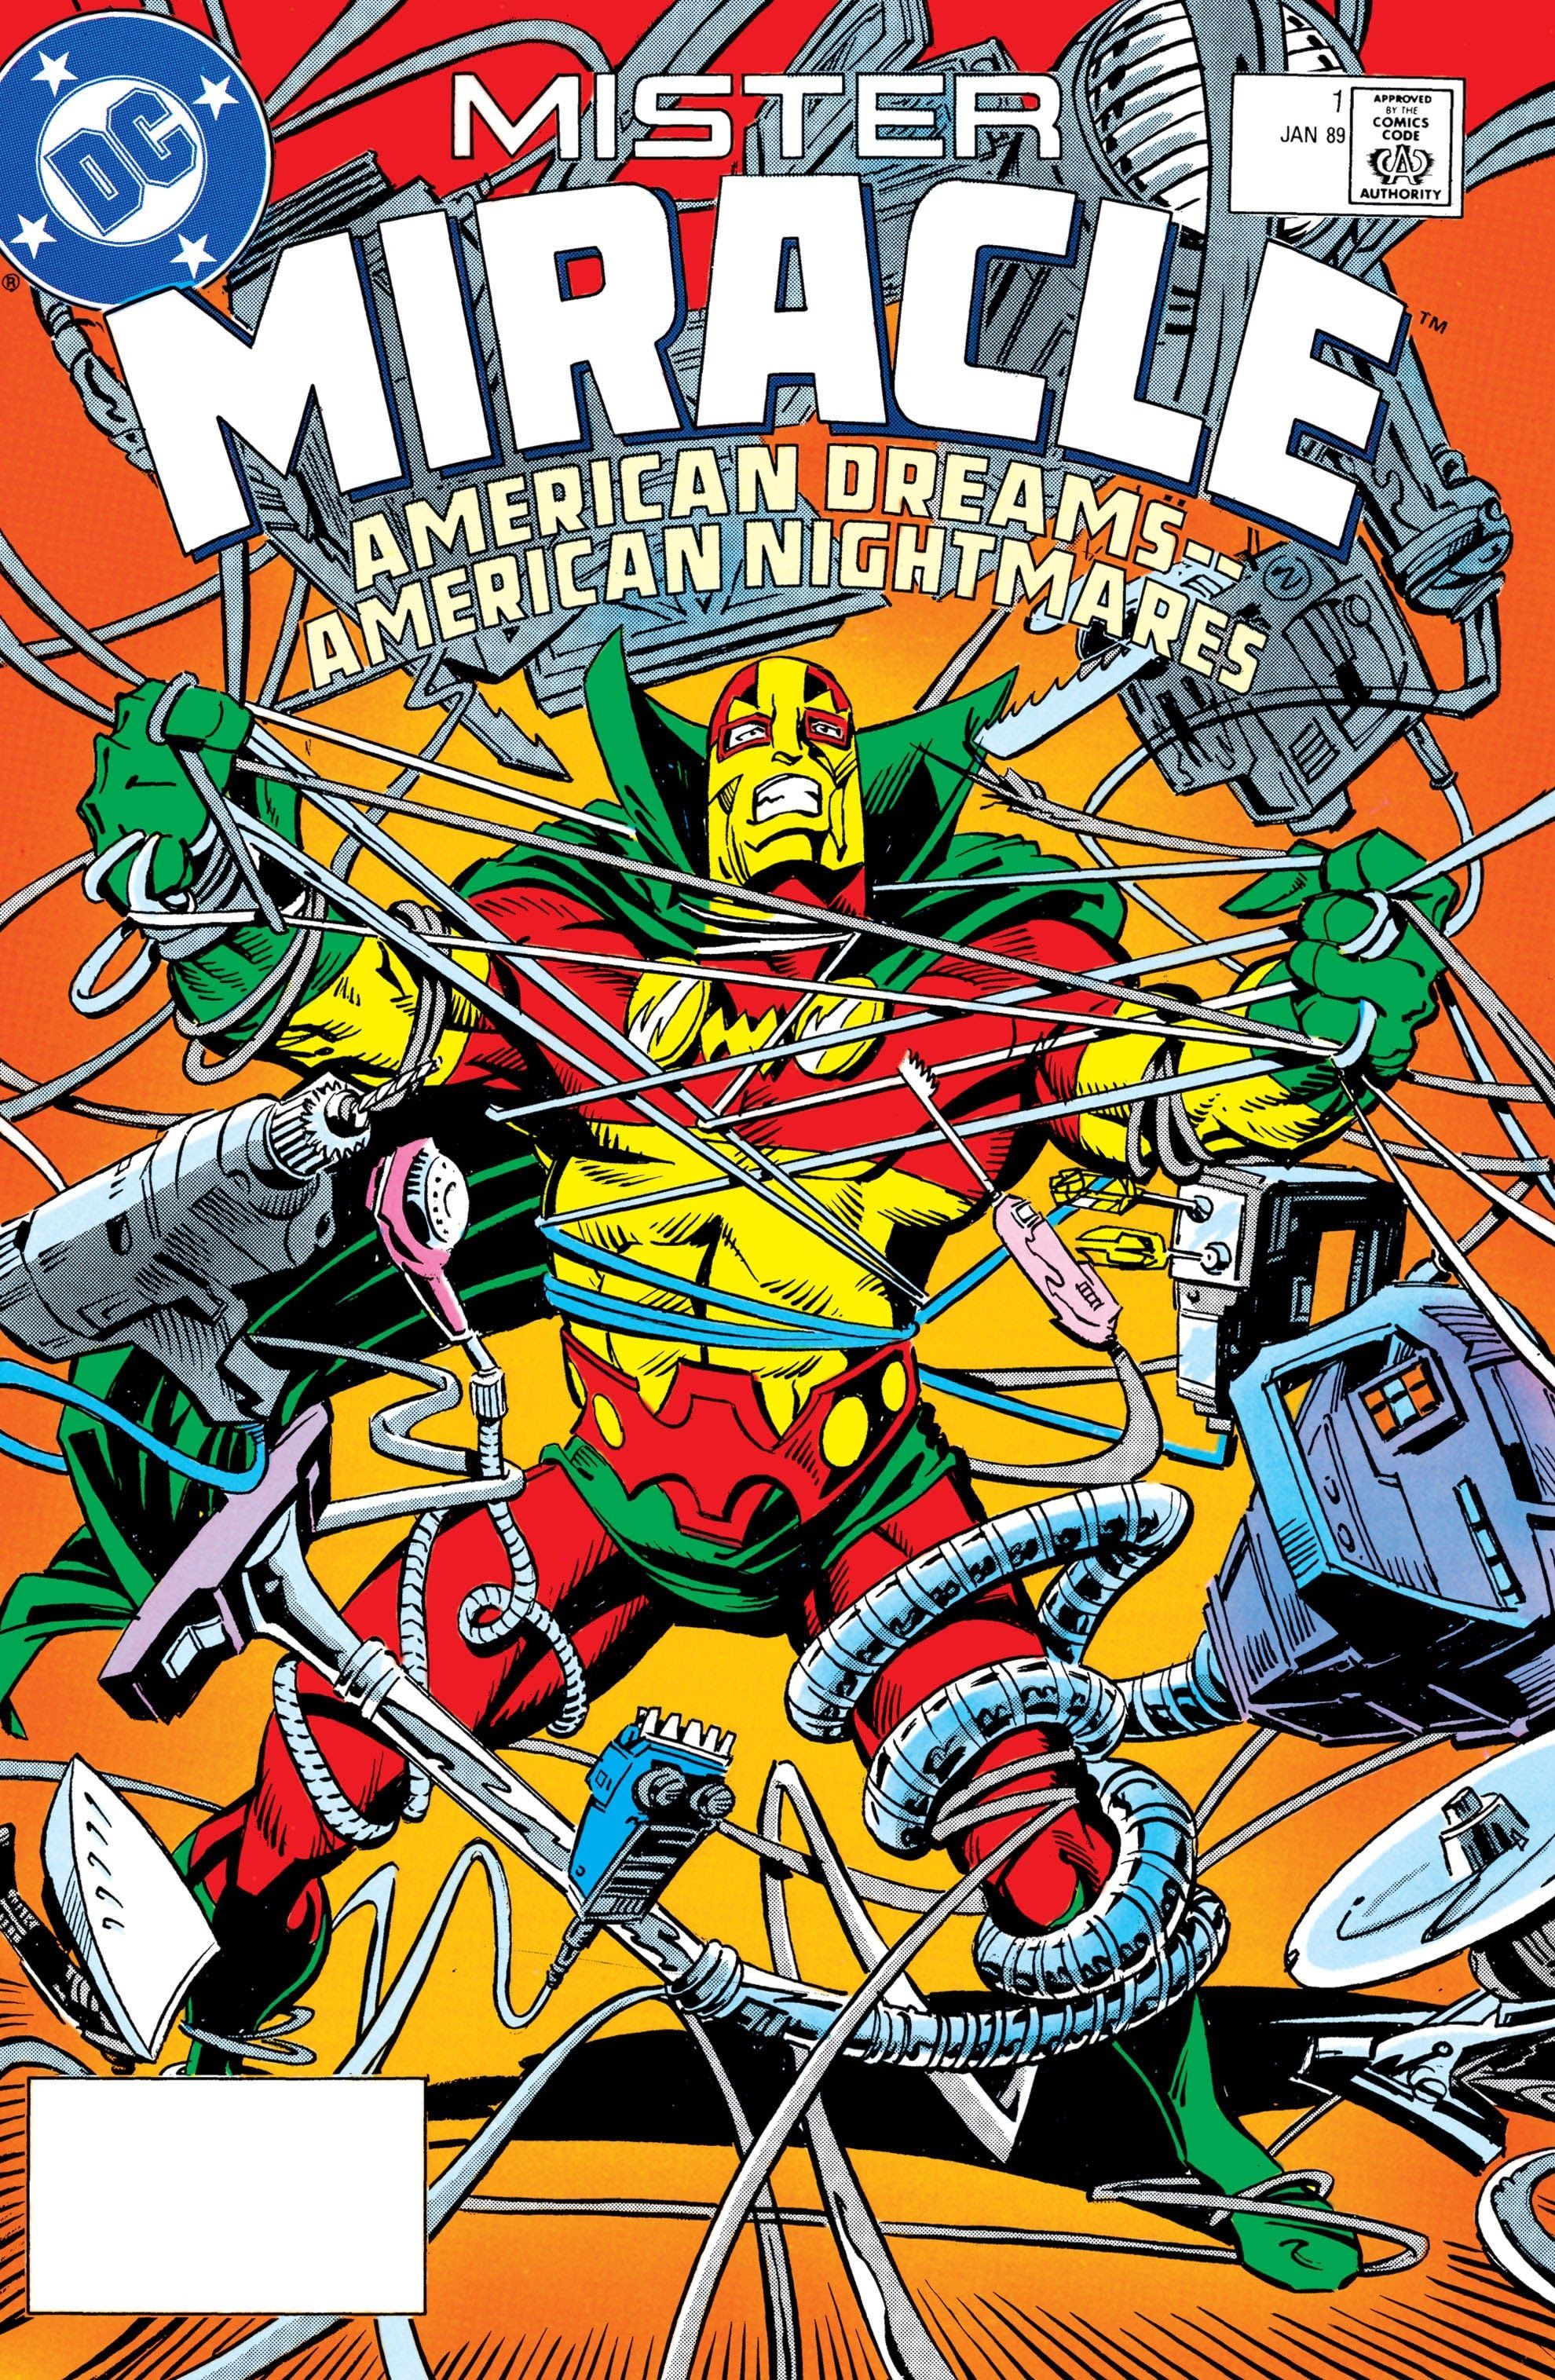 The cover of Mister Miracle #1